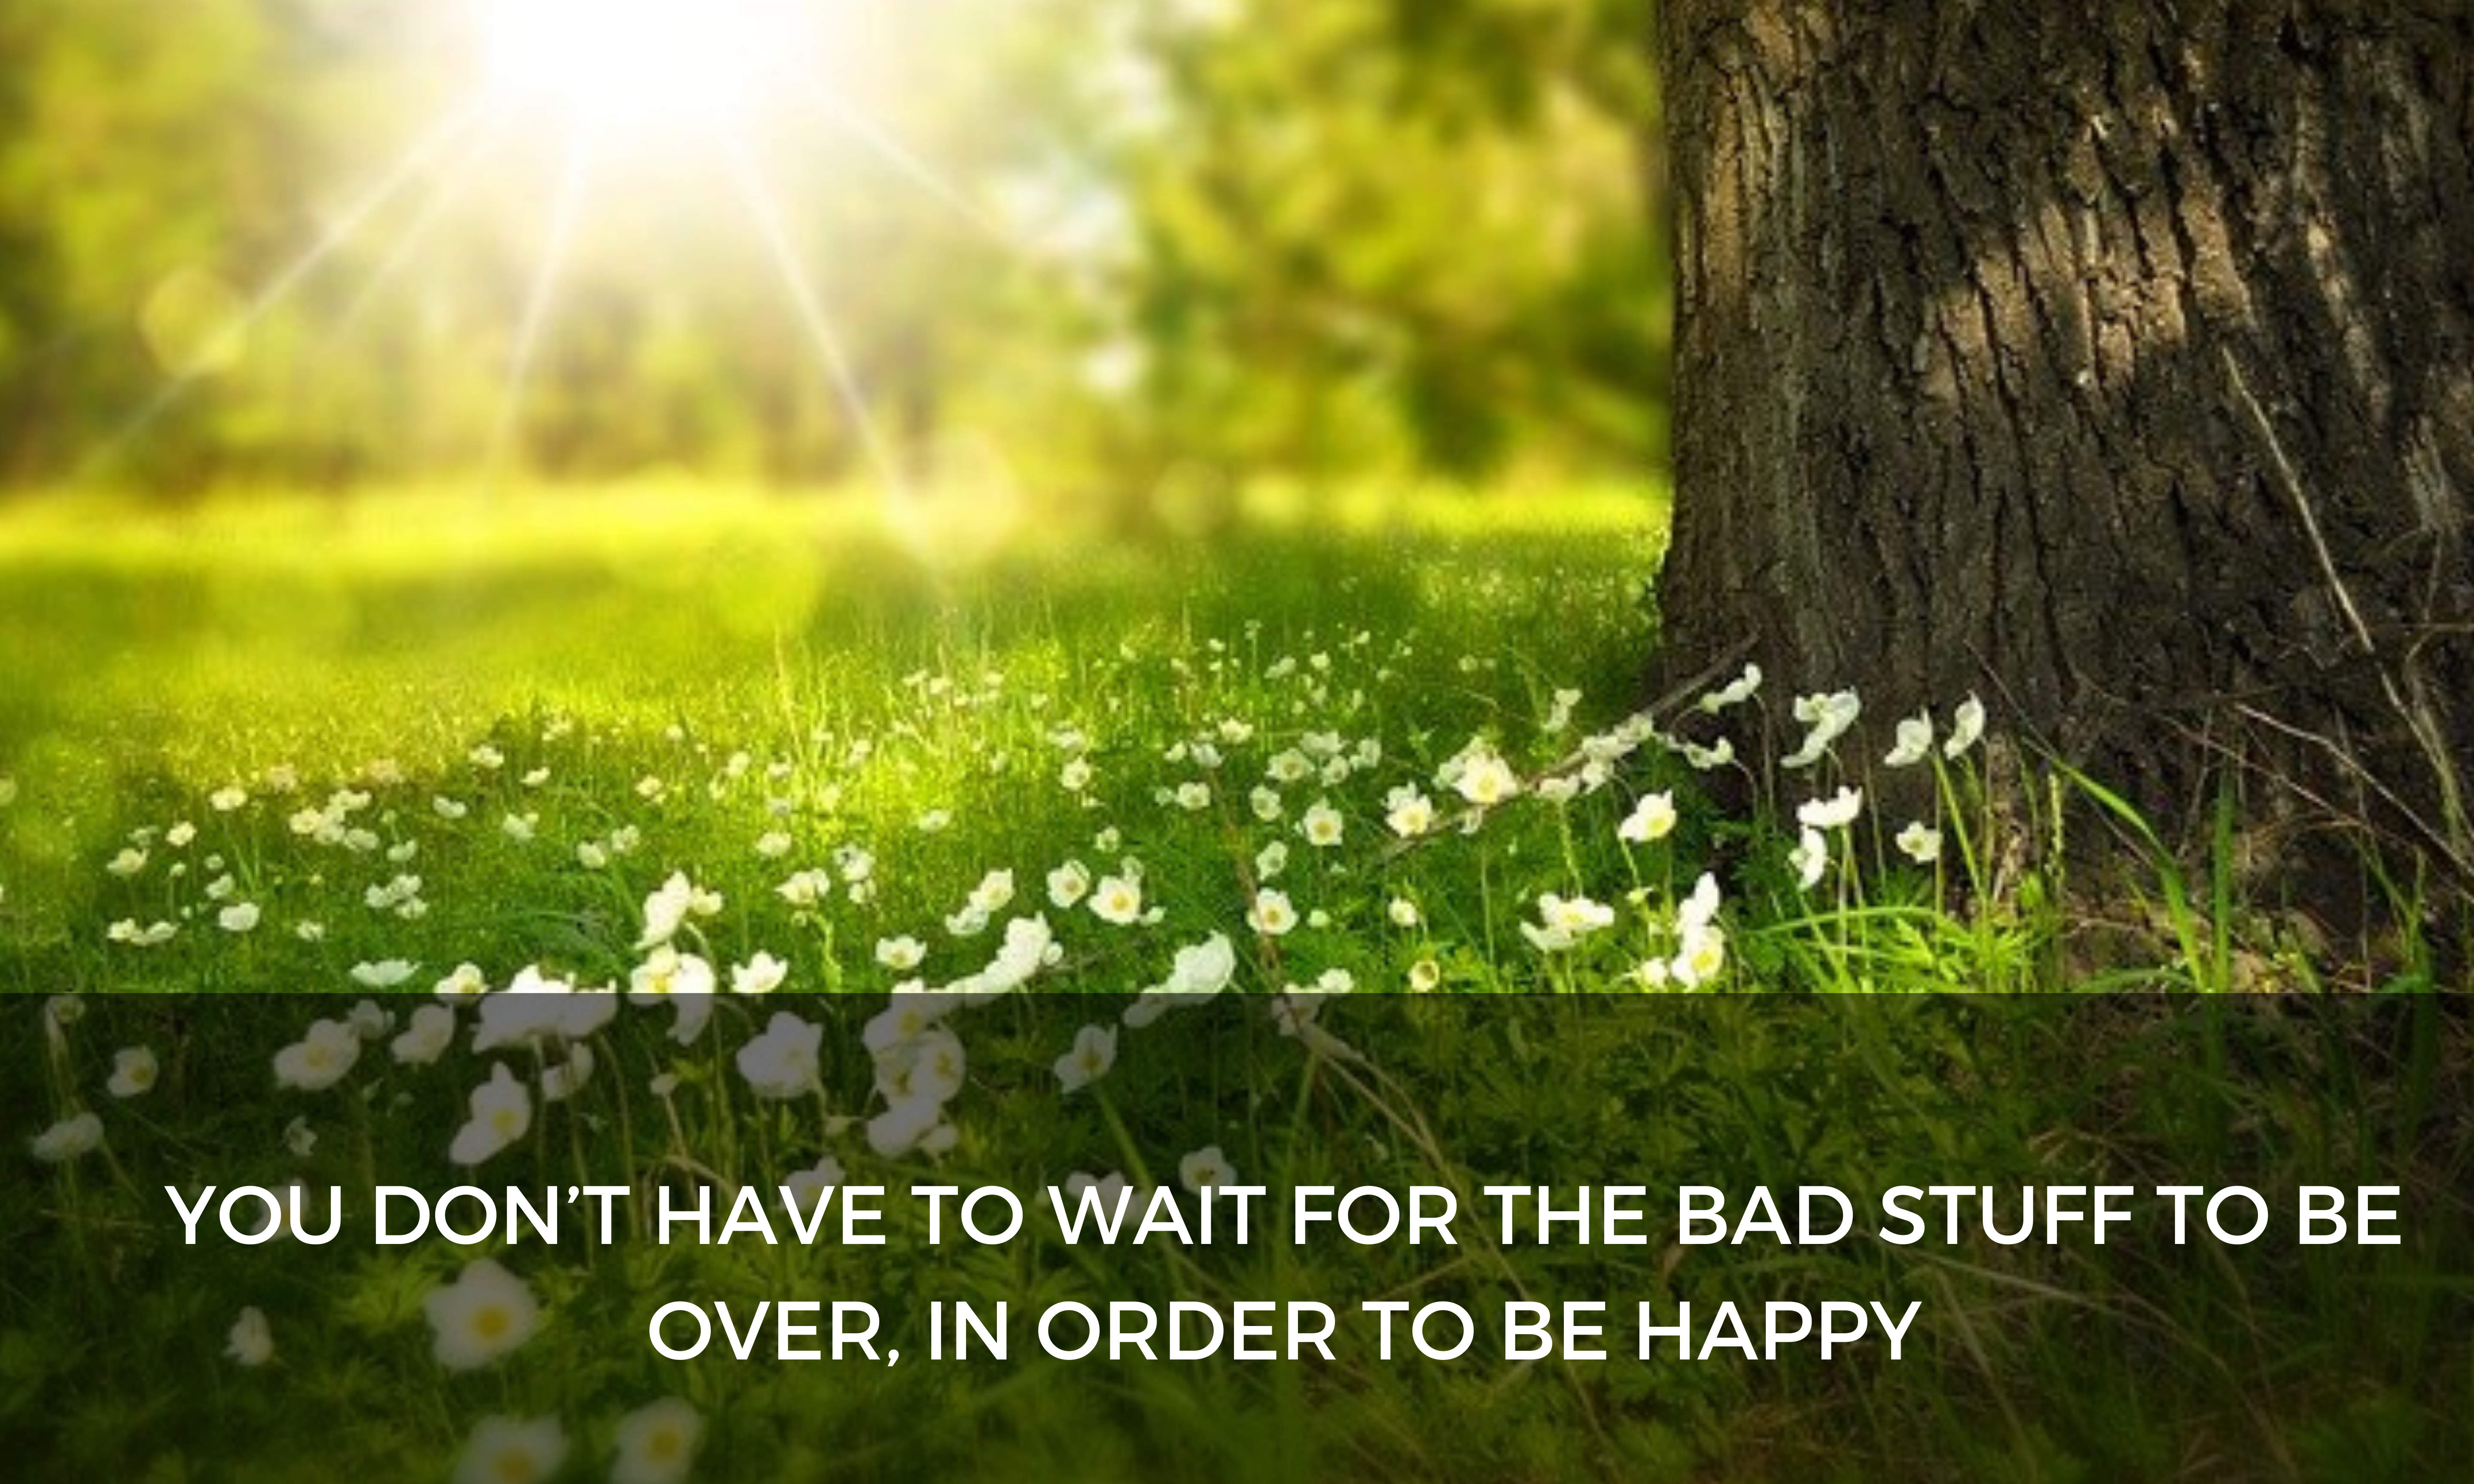 You don’t have to wait for the bad stuff to be over, in order to be happy